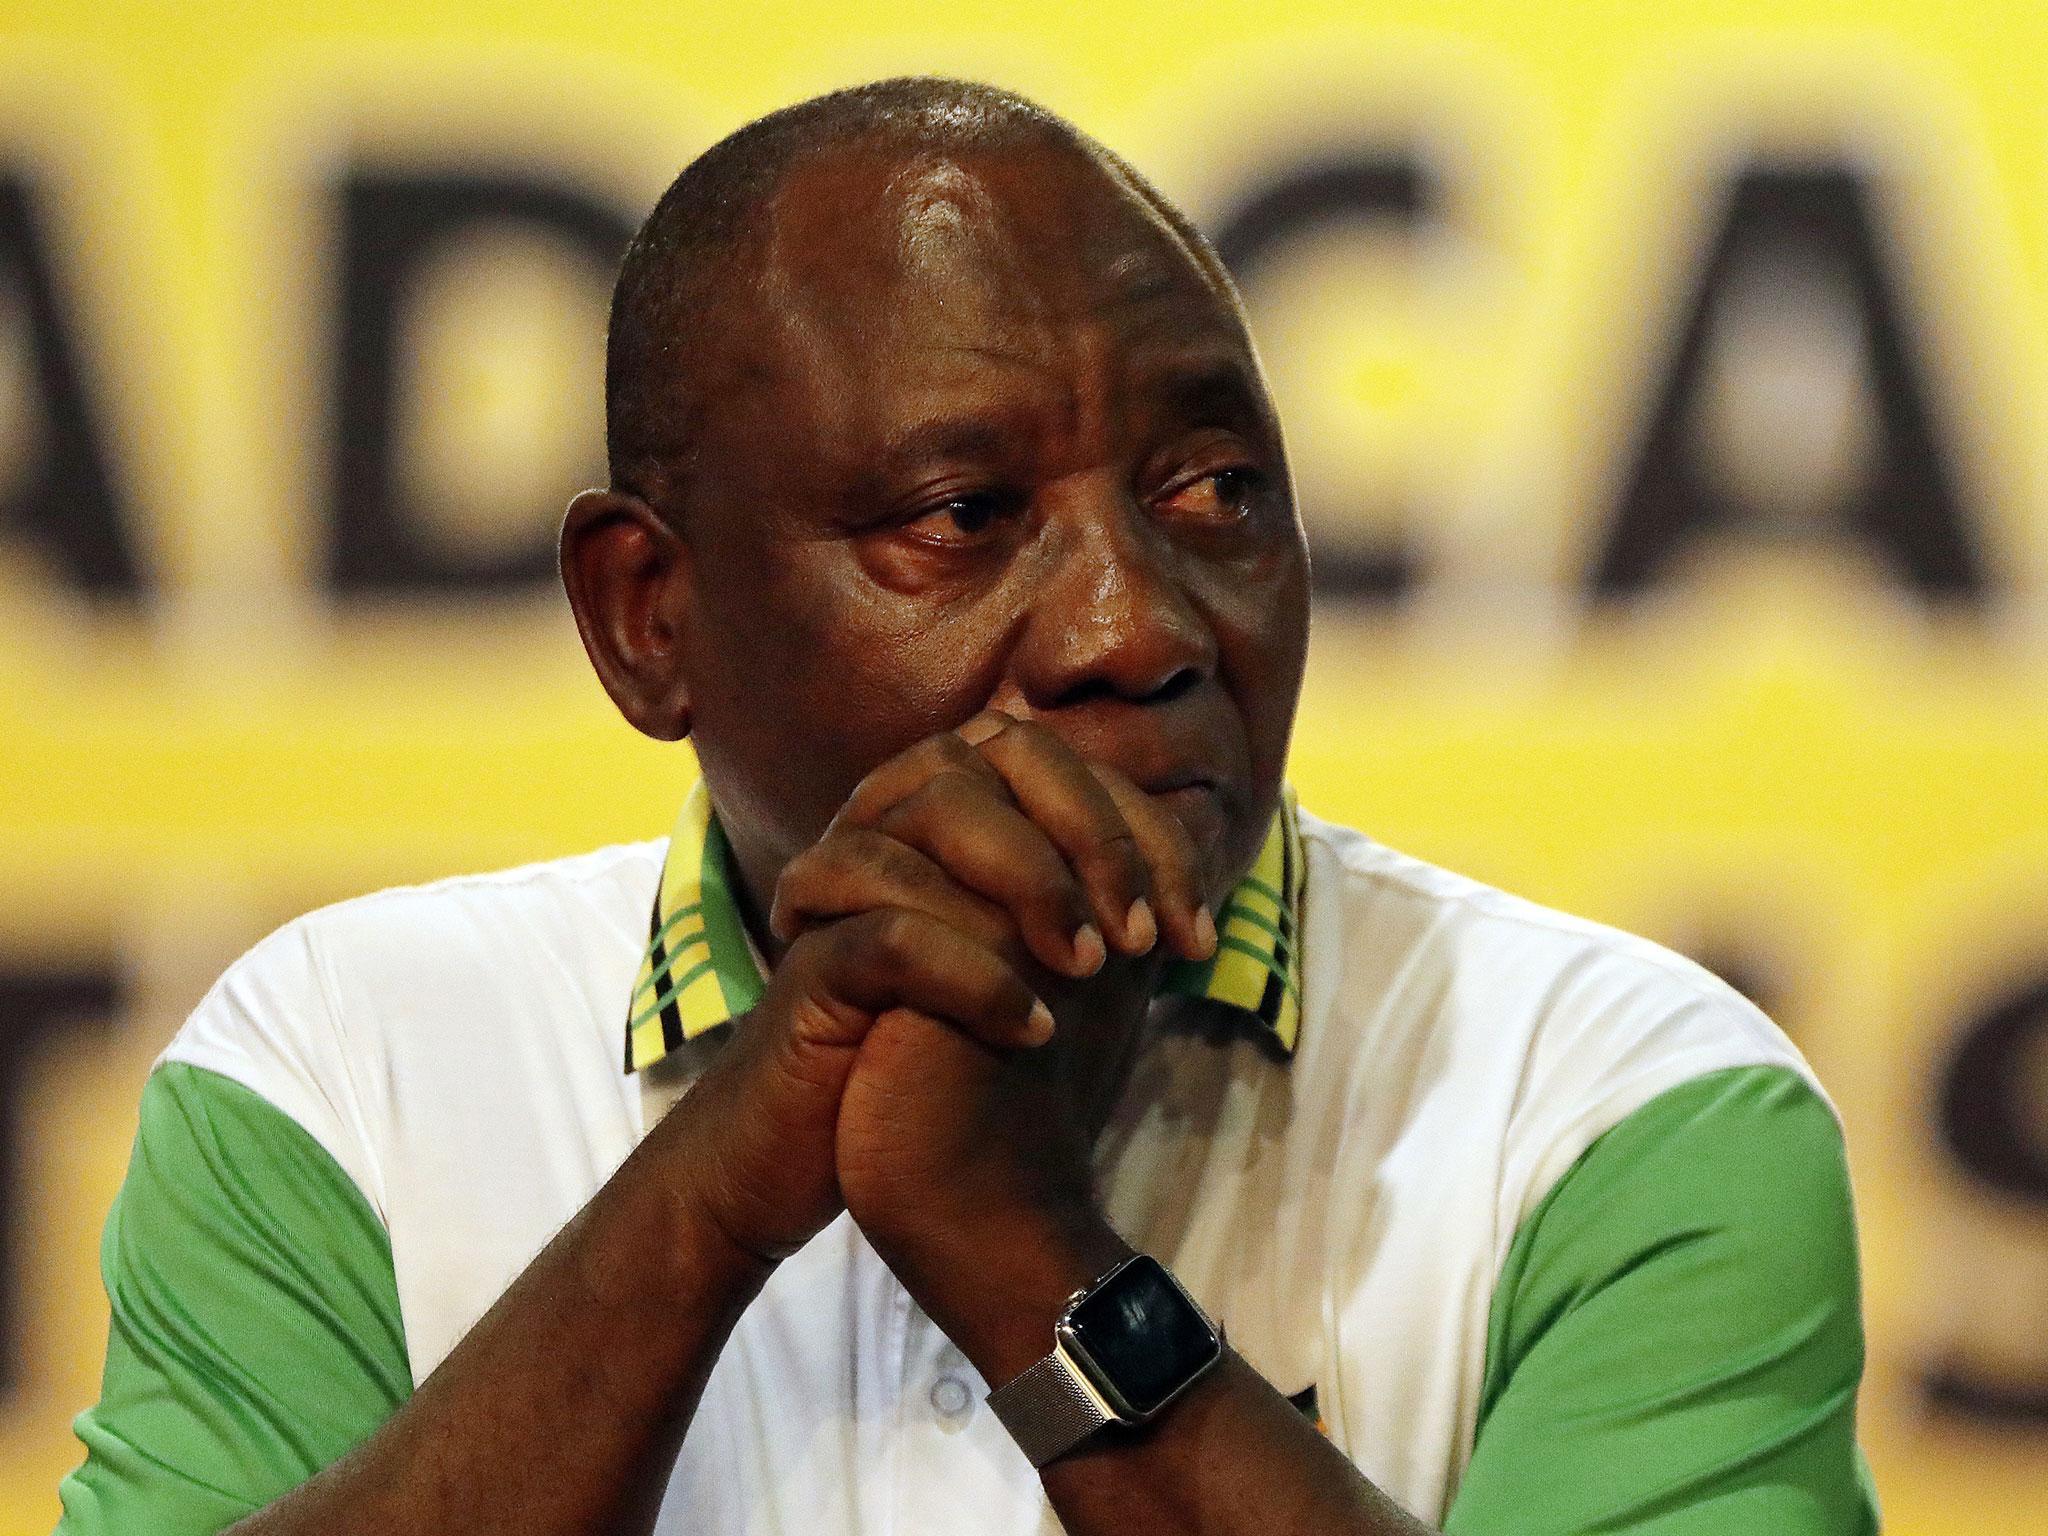 Mr Ramaphosa became emotional after it was announced he had won the vote at the ANC's elective conference in Johannesburg